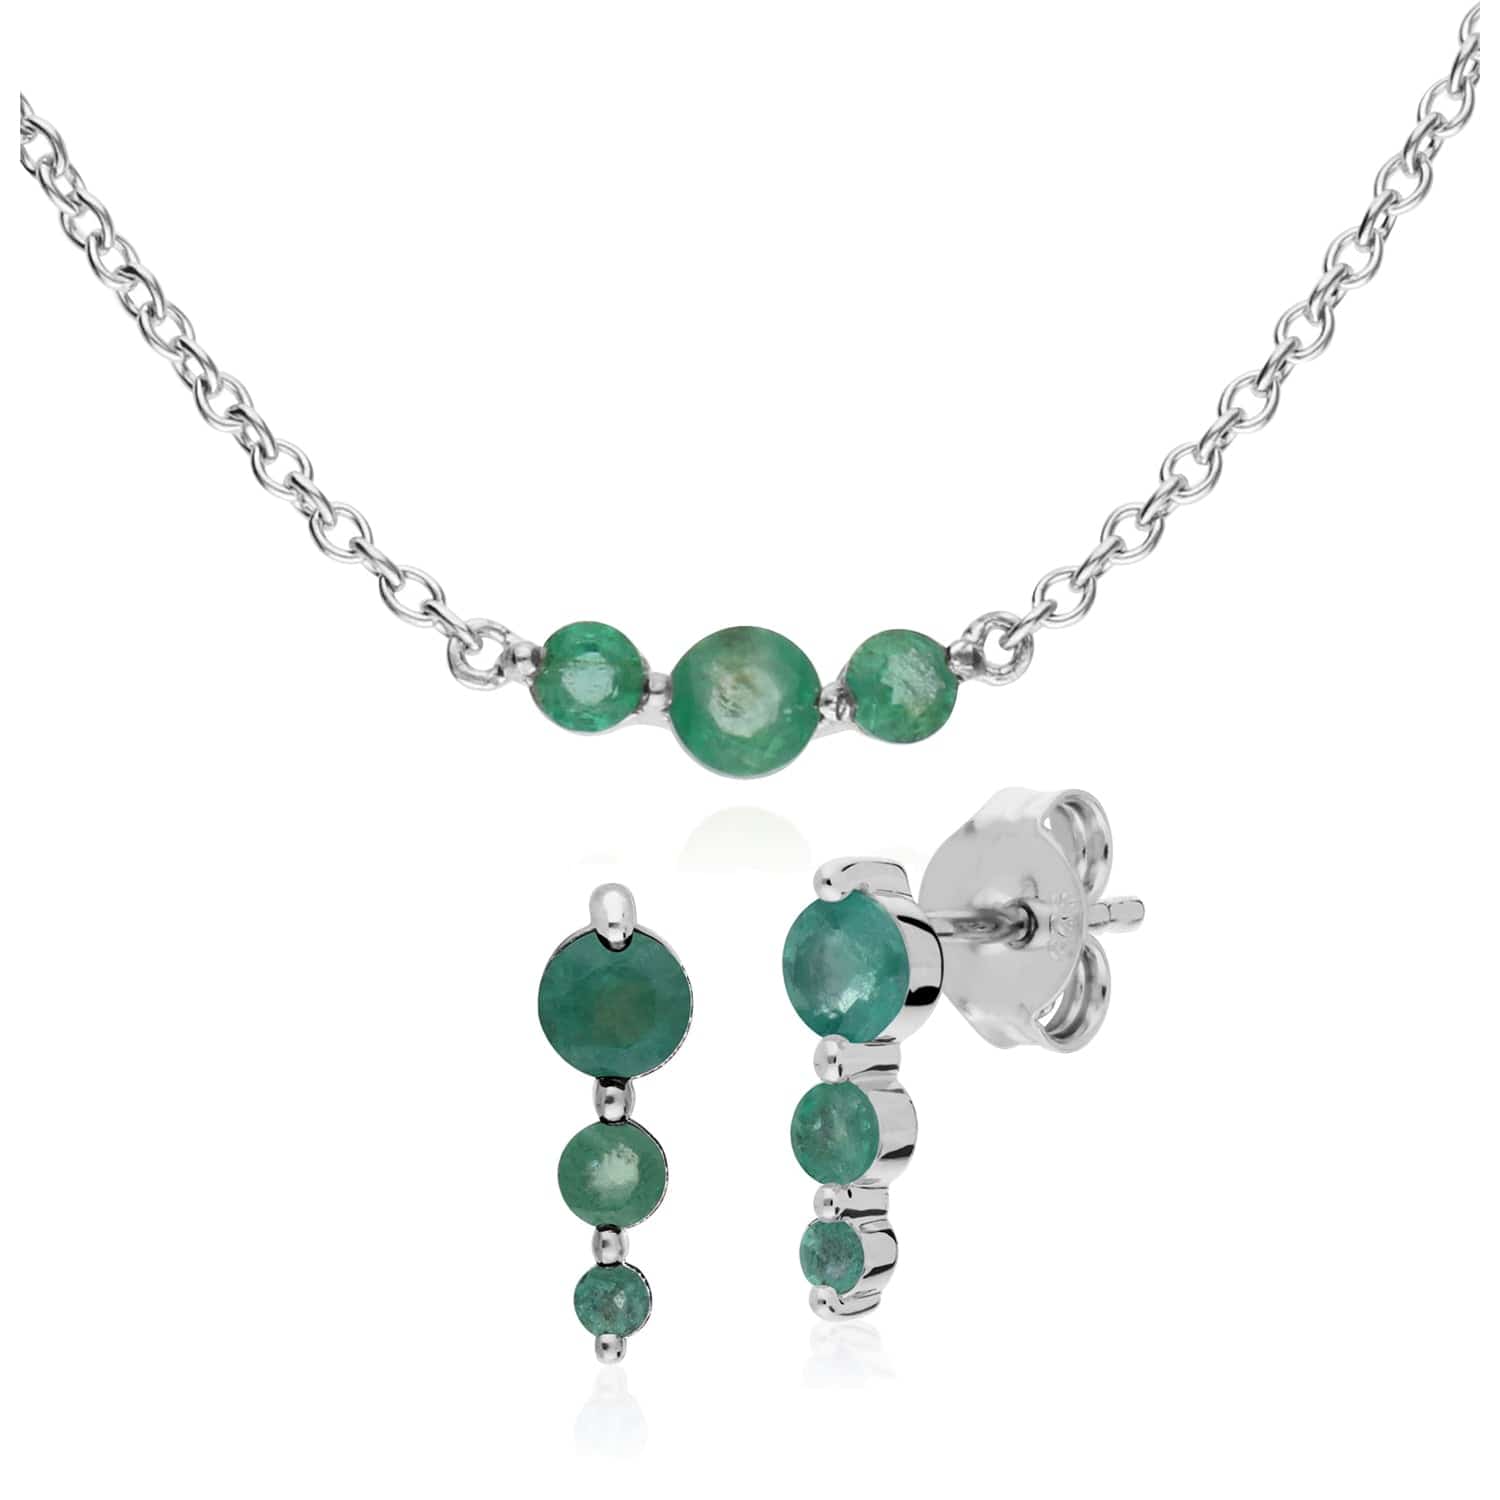 270E025507925-270N034207925 Classic Round Emerald Three Stone Earrings & Necklace Set in 925 Sterling Silver 1